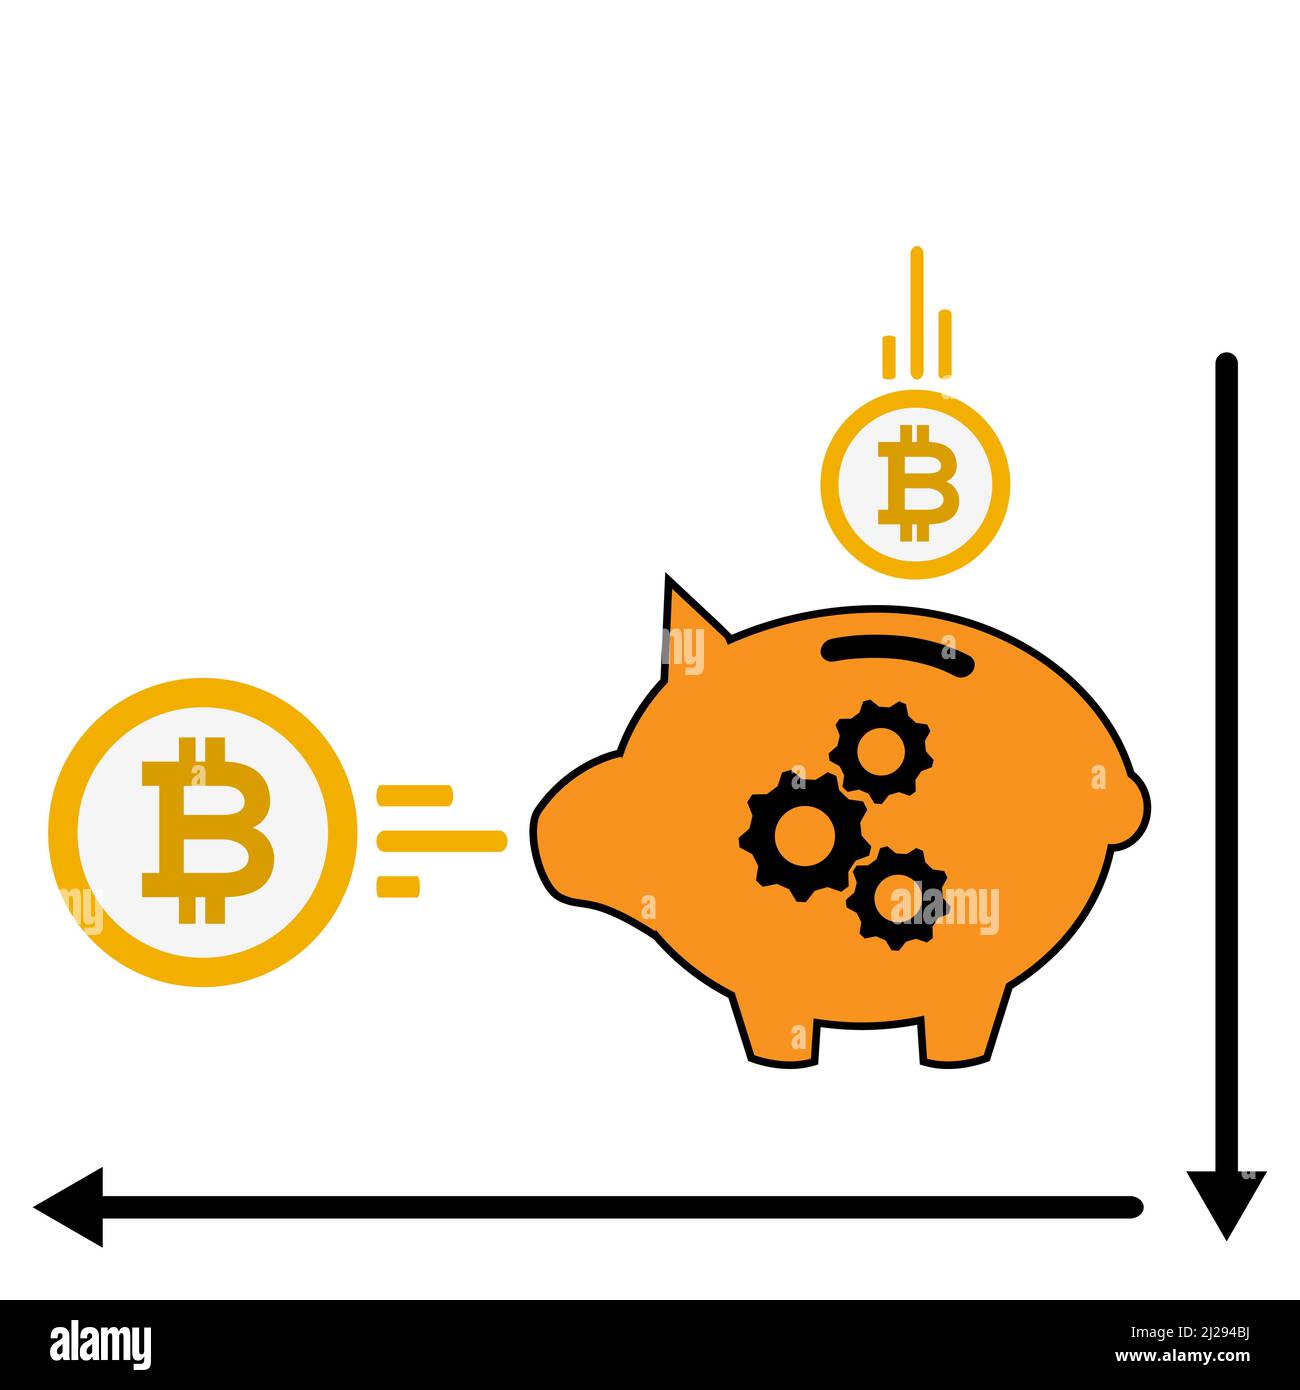 Concept of doubling bitcoin on savings. Vector Illustration on sky background. Stock Vector